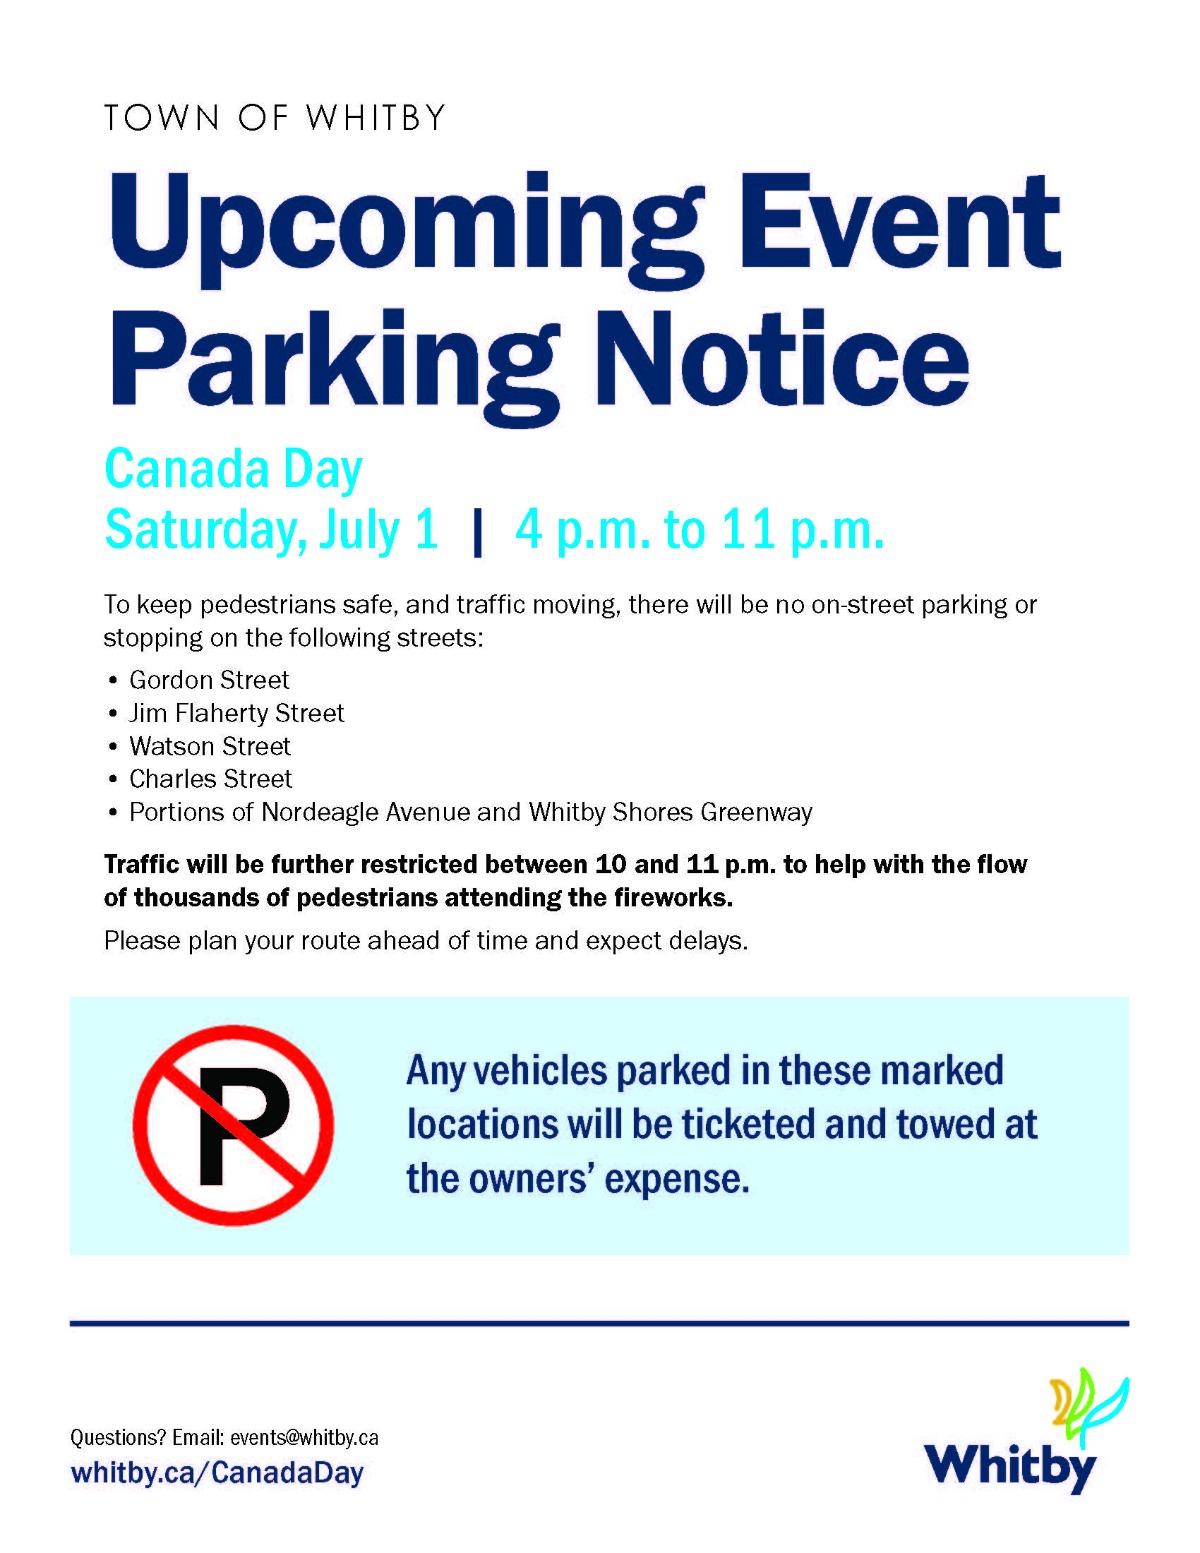 Notice of Parking Restrictions for Canada Day